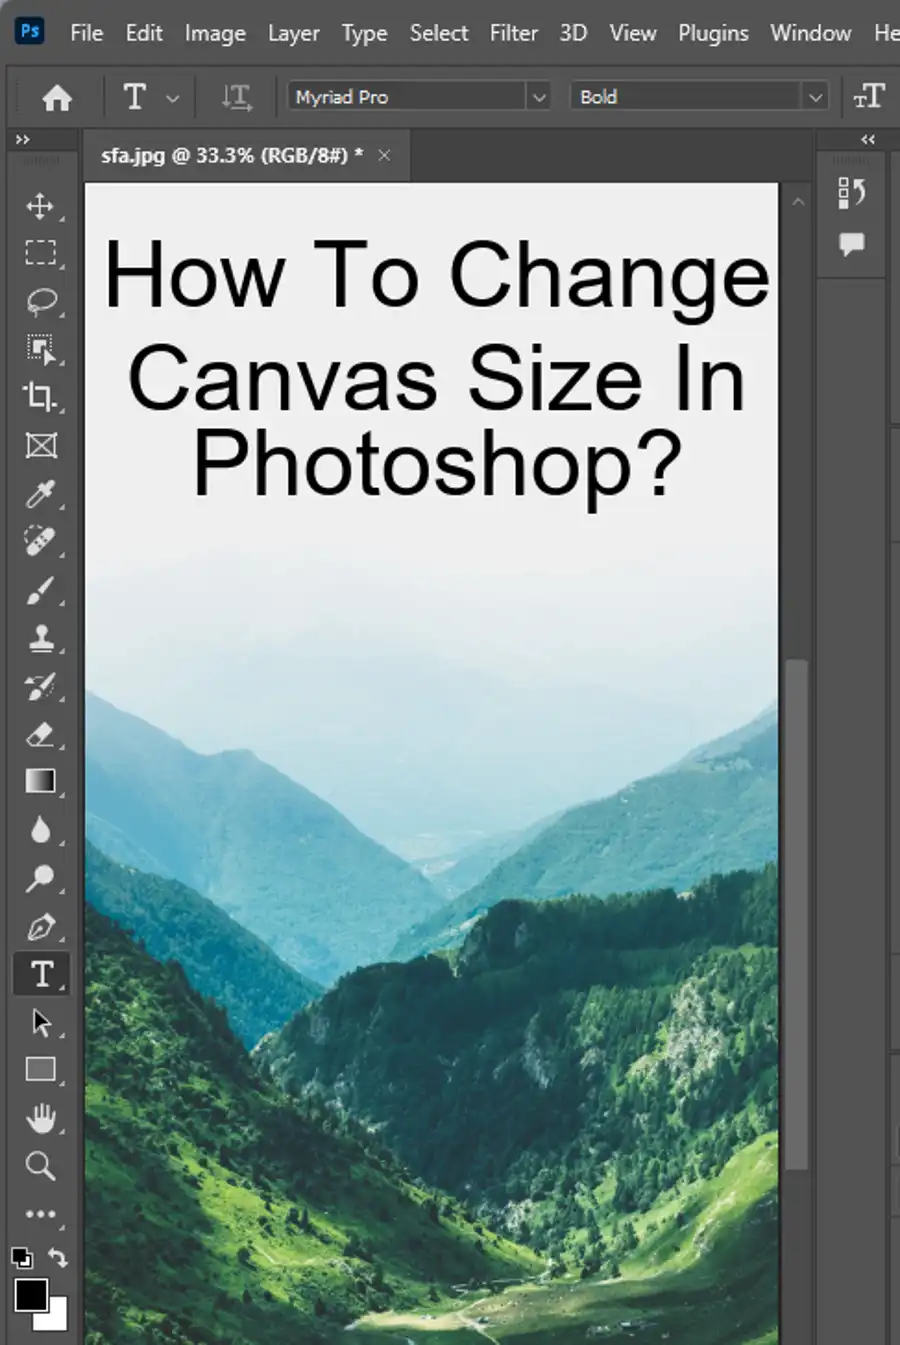 How To Change Canvas Size In Photoshop